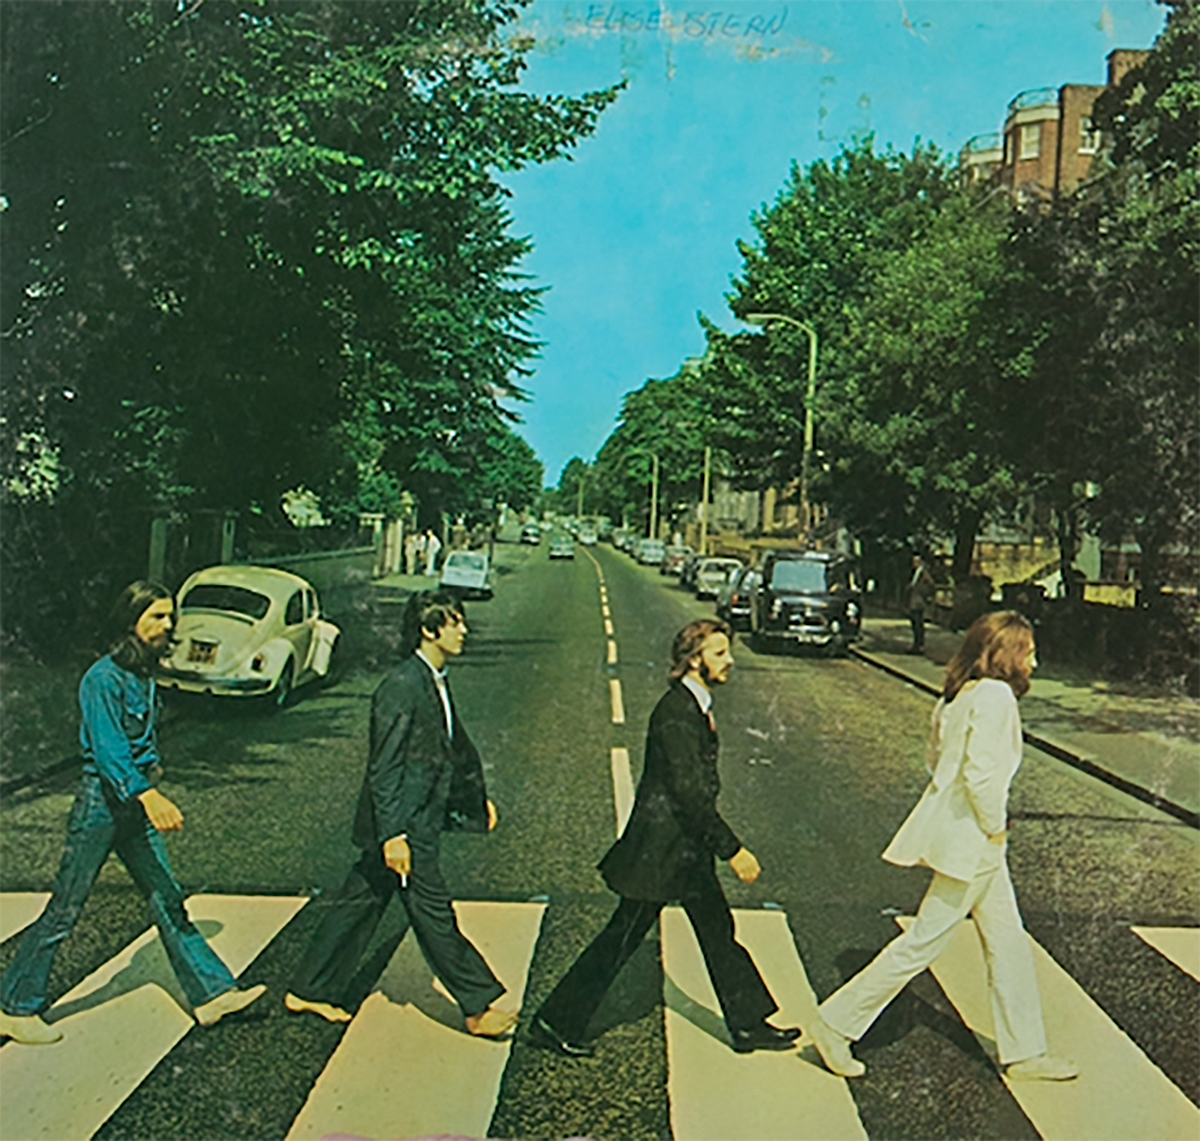 What Happened The Day The Beatles Crossed Abbey Road?, by Duke University  Opinion and Analysis, Duke University Voices